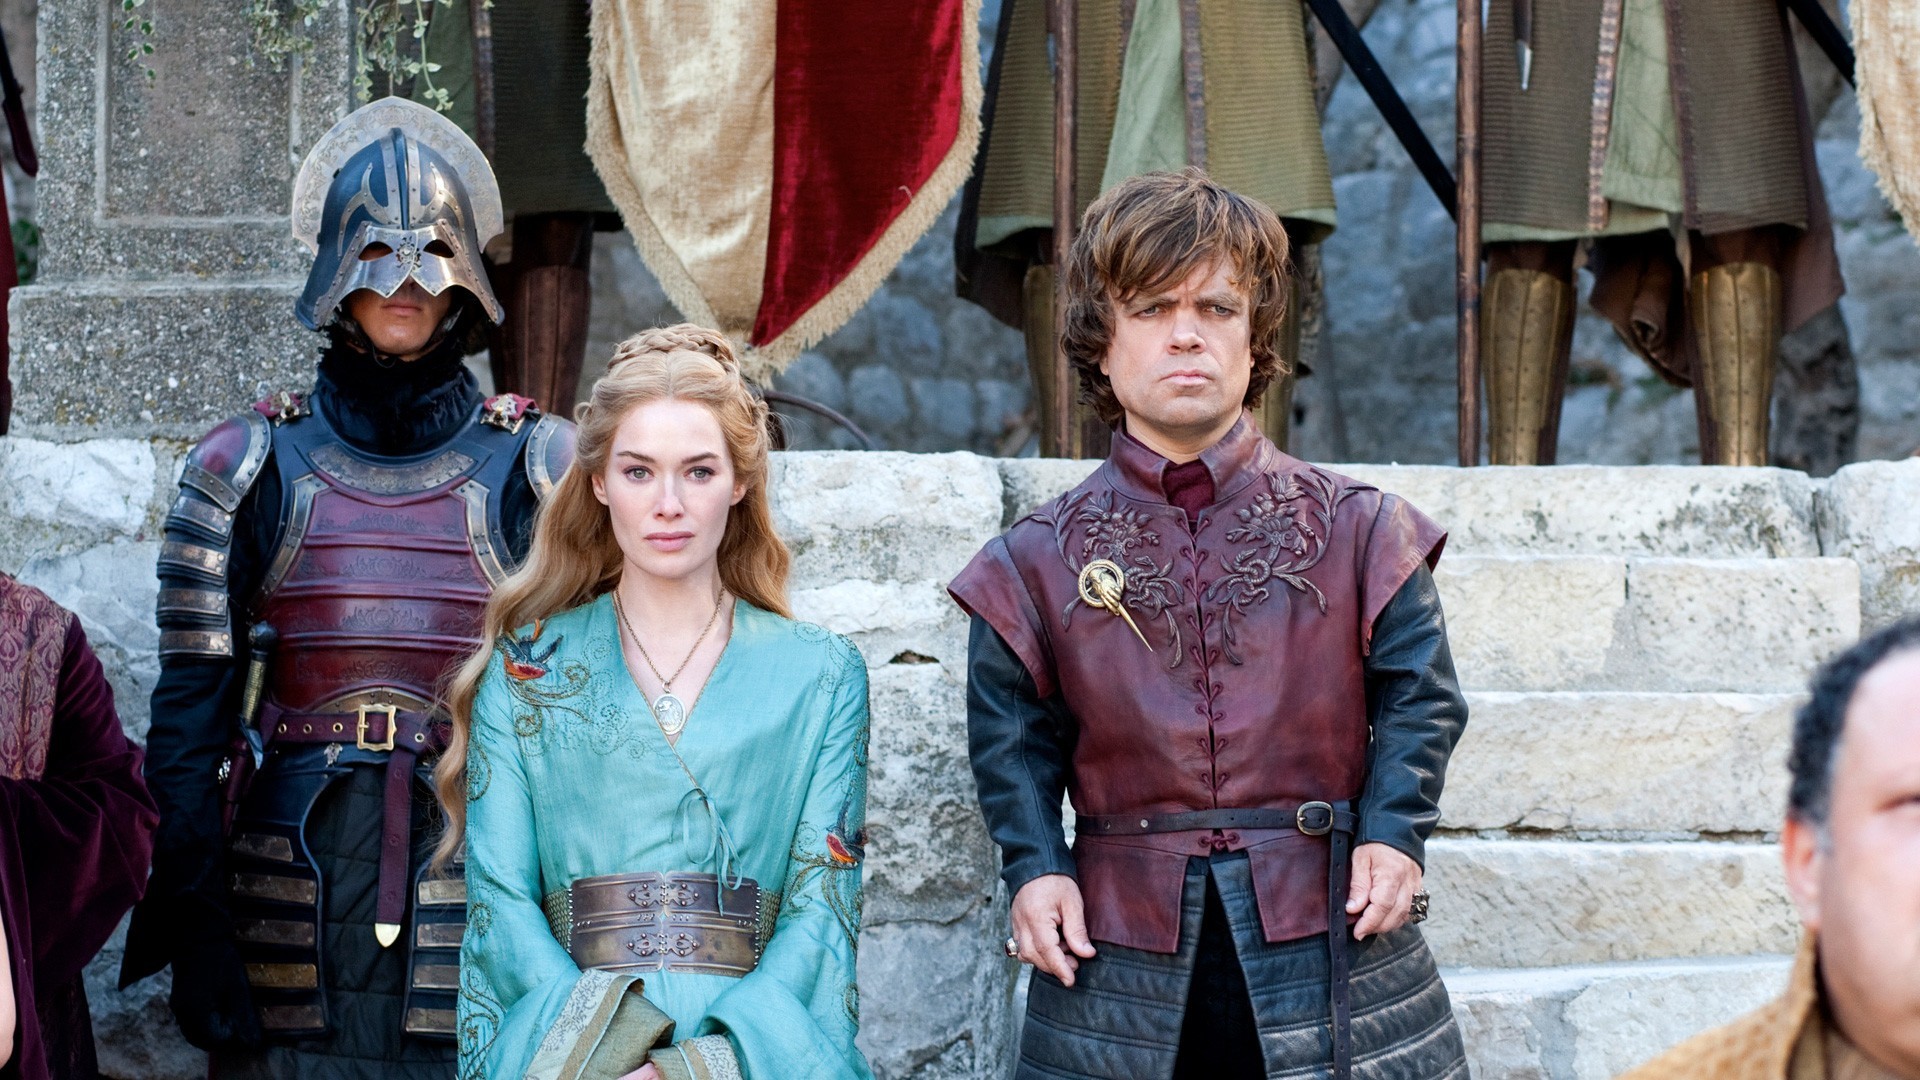 People 1920x1080 Game of Thrones Tyrion Lannister Cersei Lannister Peter Dinklage TV series Lena Headey